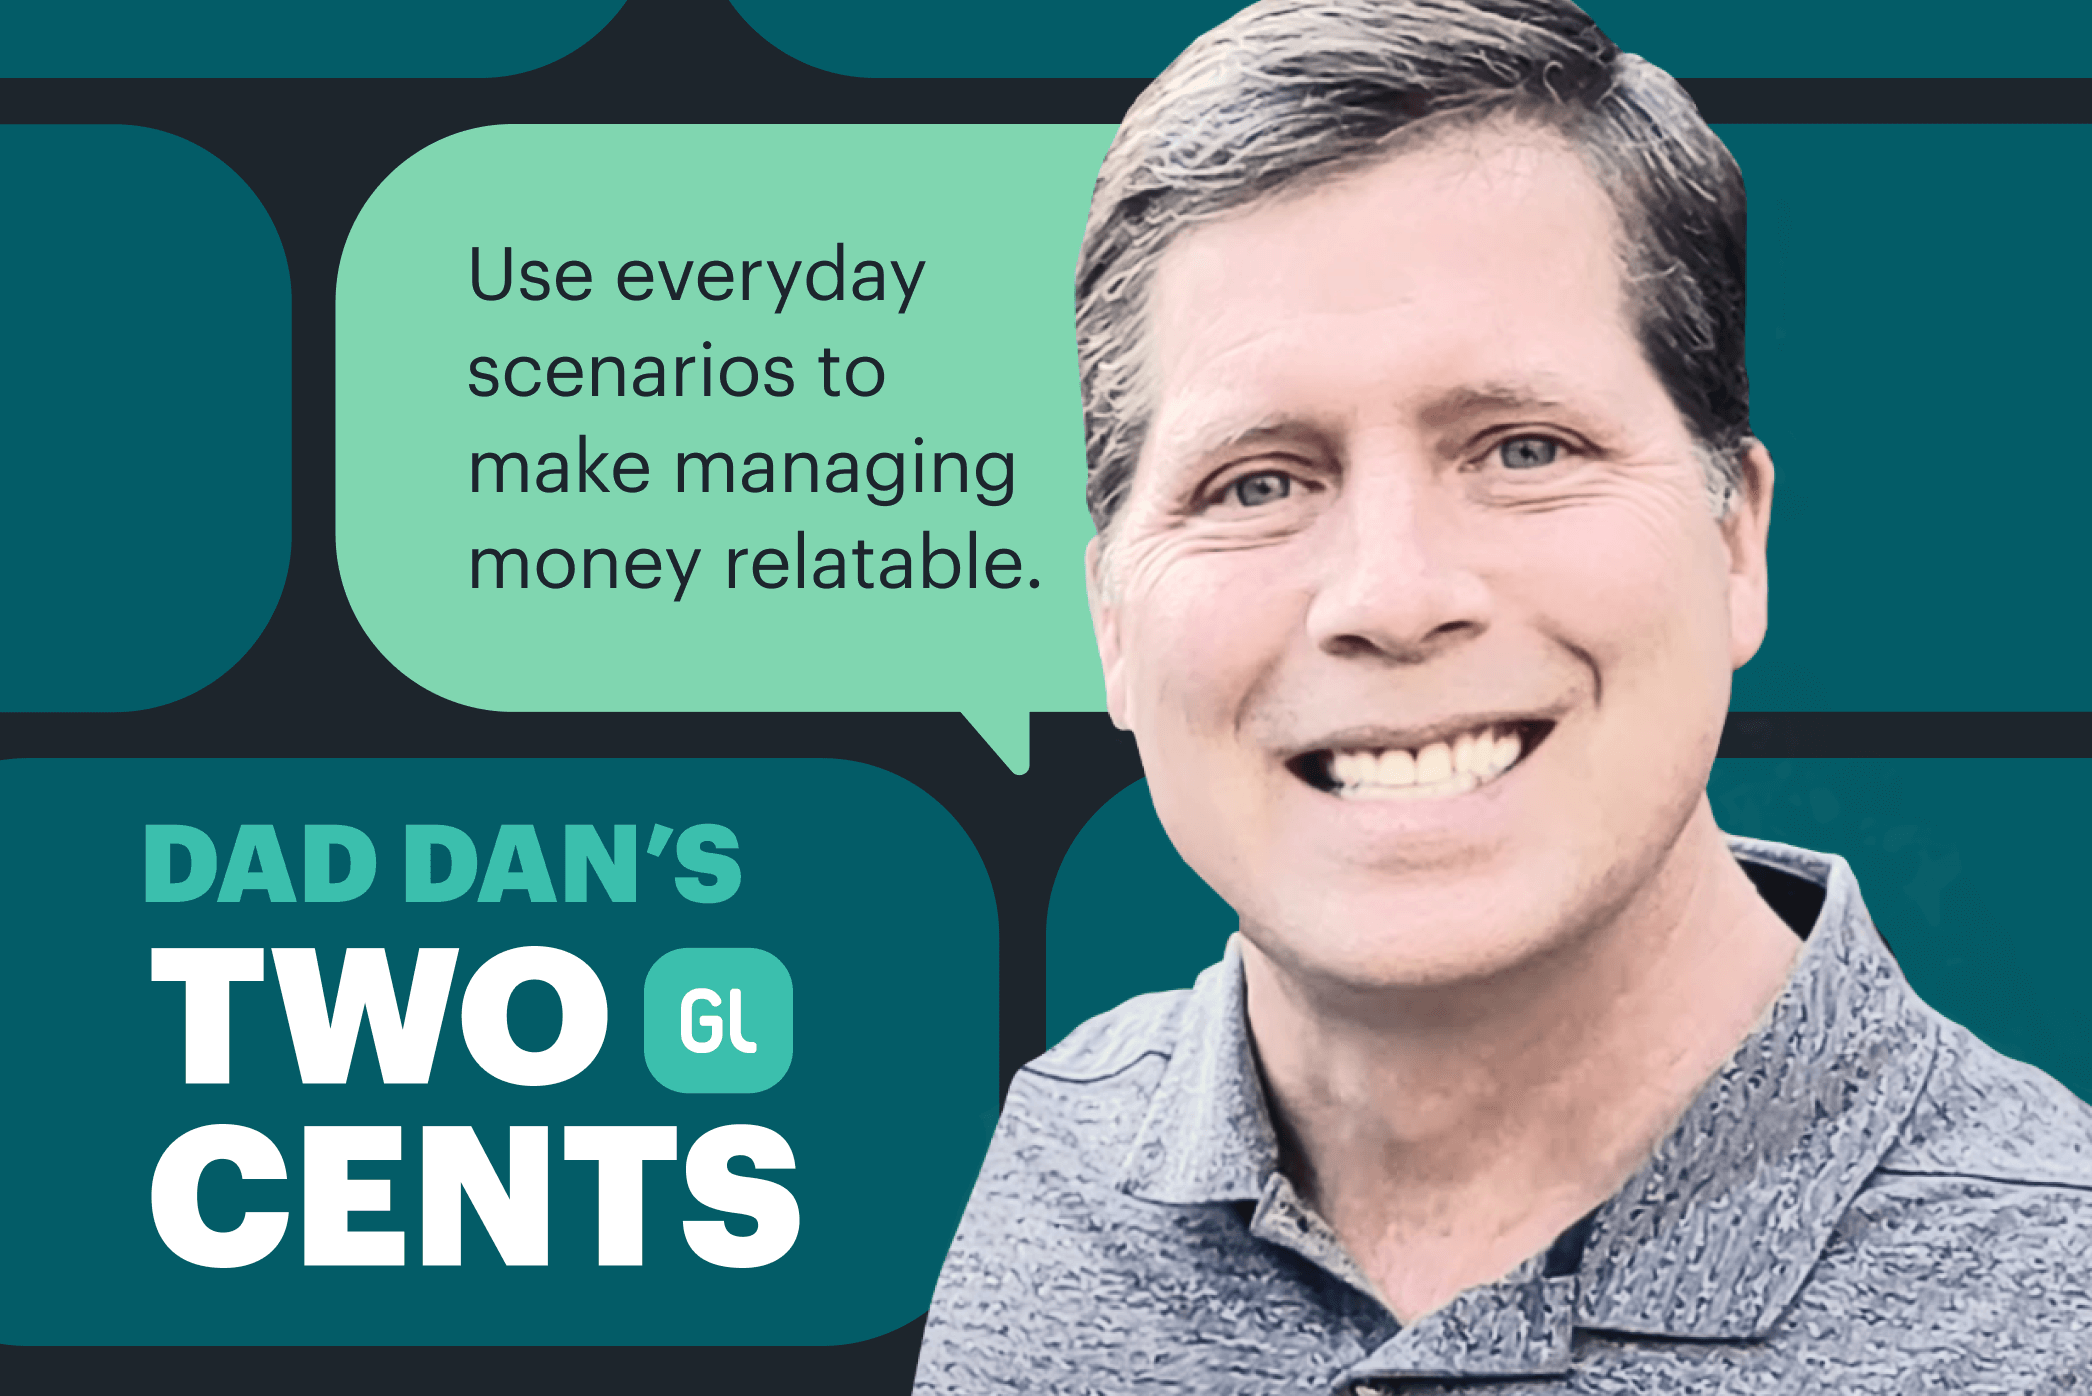 Dad Dan's two cents quote